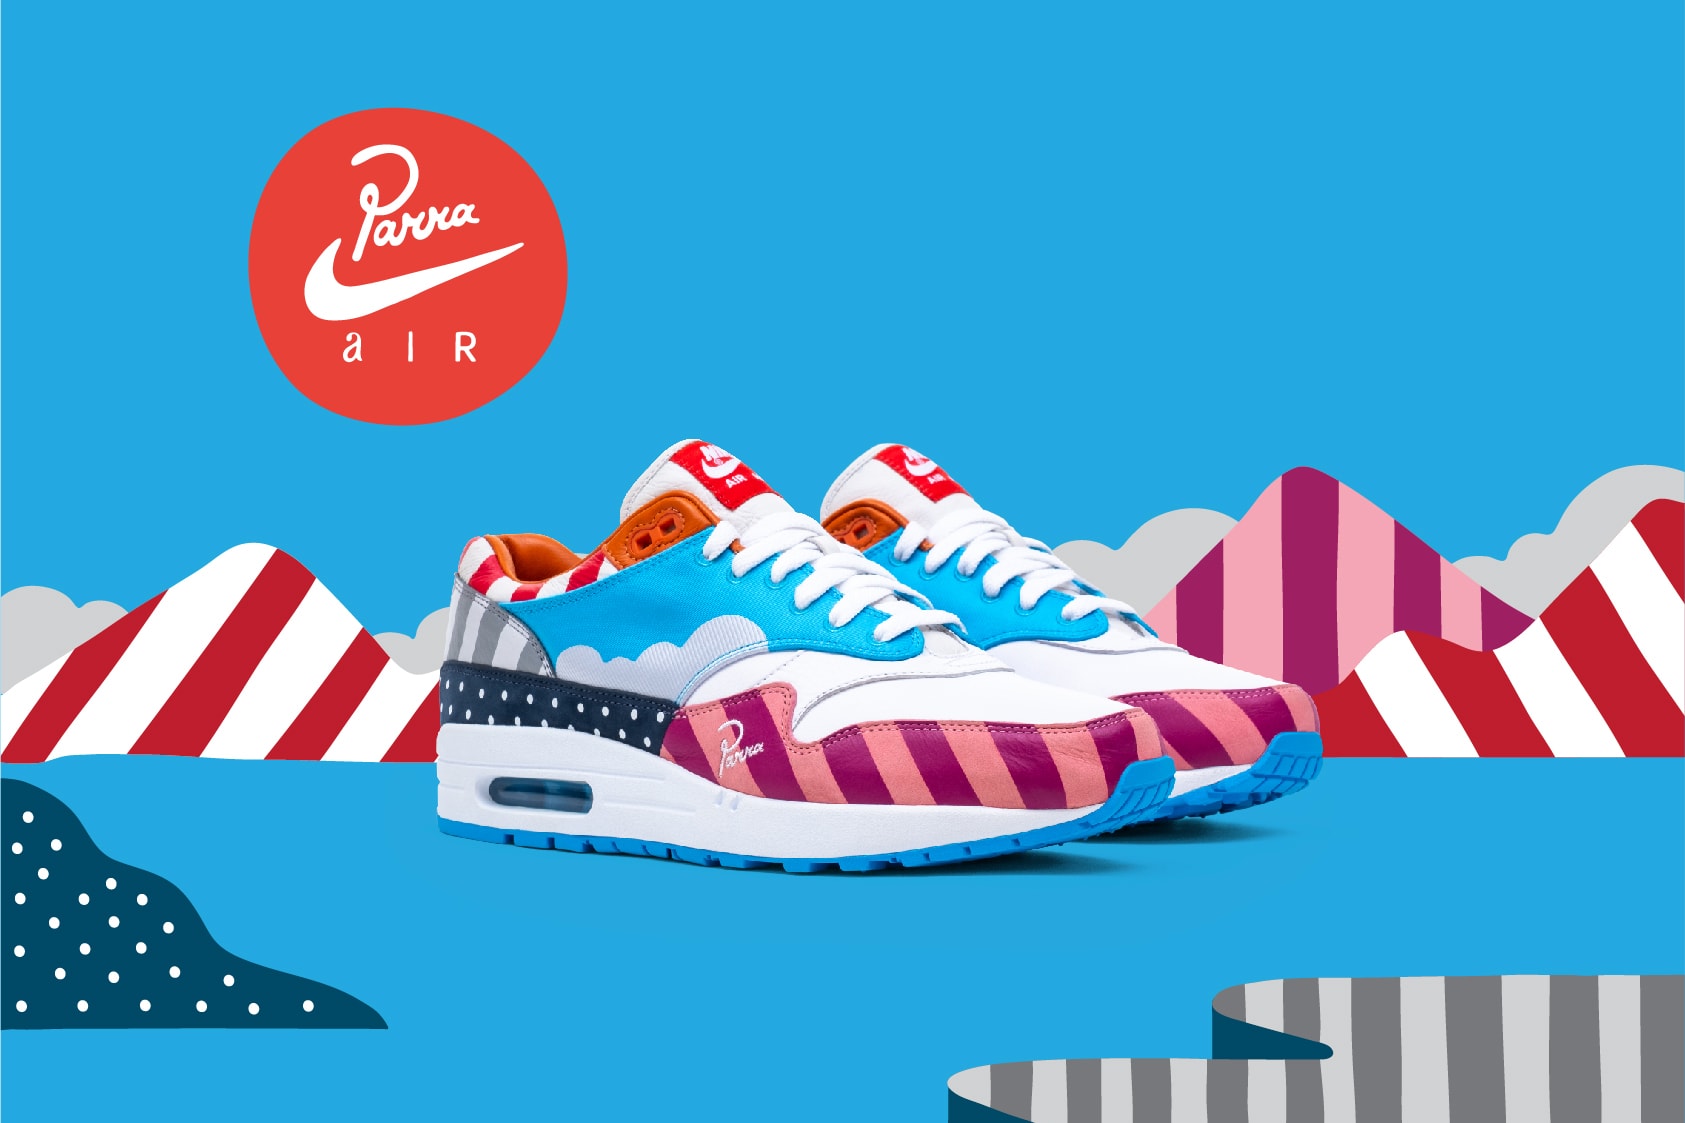 Parra Nike Air Max One Friends Family Zoom Spiridon Apparel Footwear Sneakers Kicks Trainers Shoes Release Details Purchase Buy Cop First Look